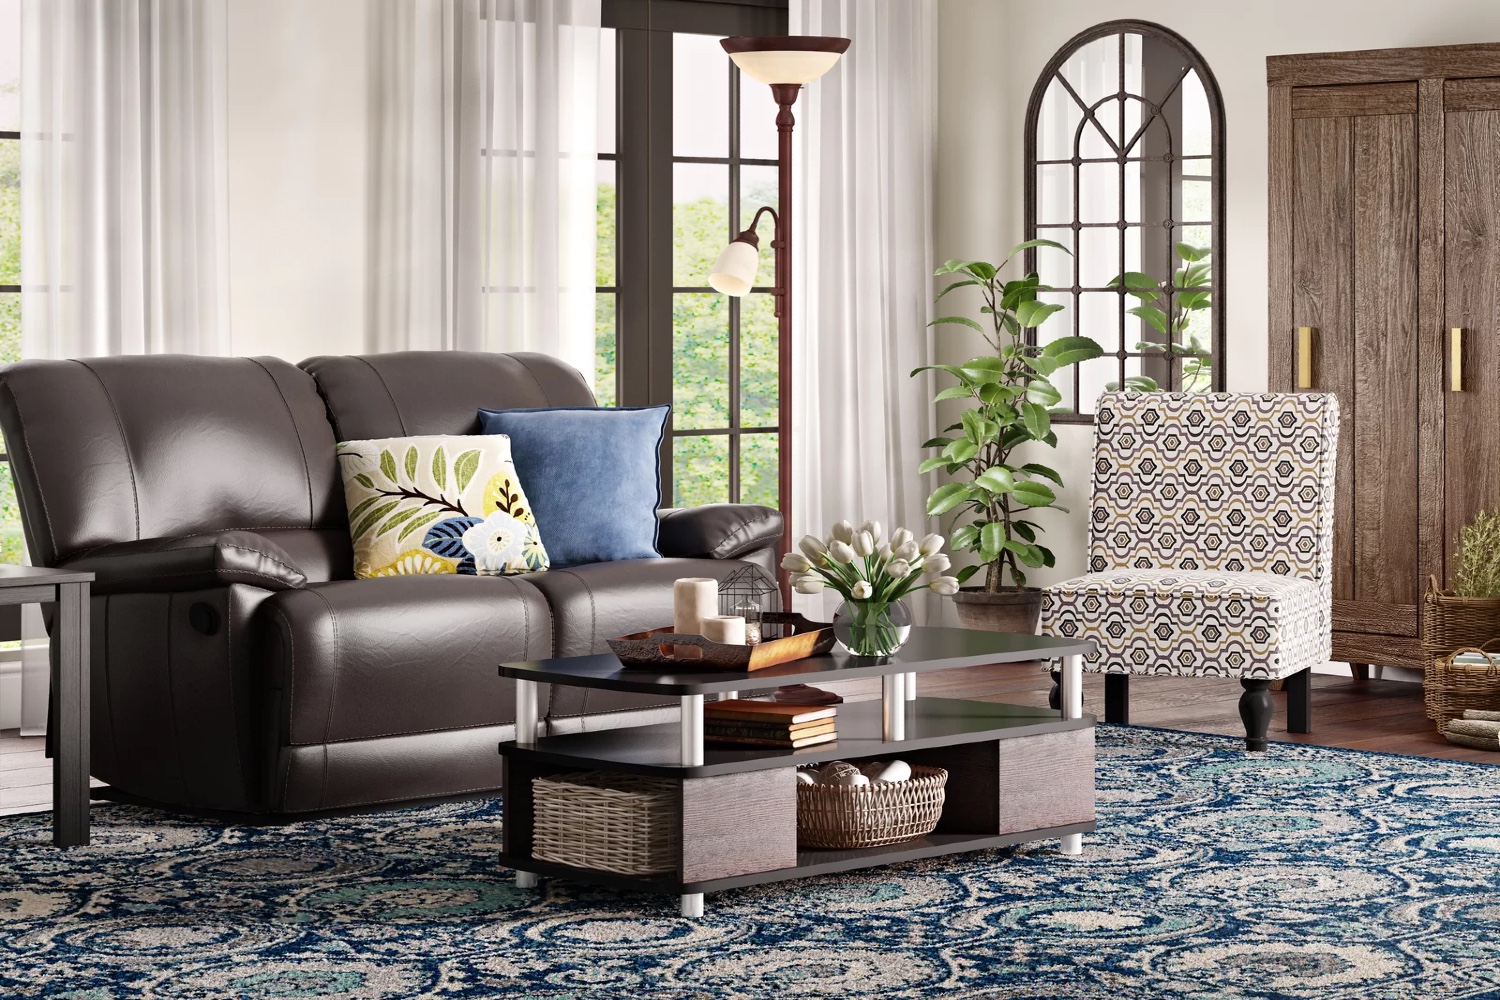 The Best Reclining Loveseat on top of a blue patterned rug with two pillows placed on it.